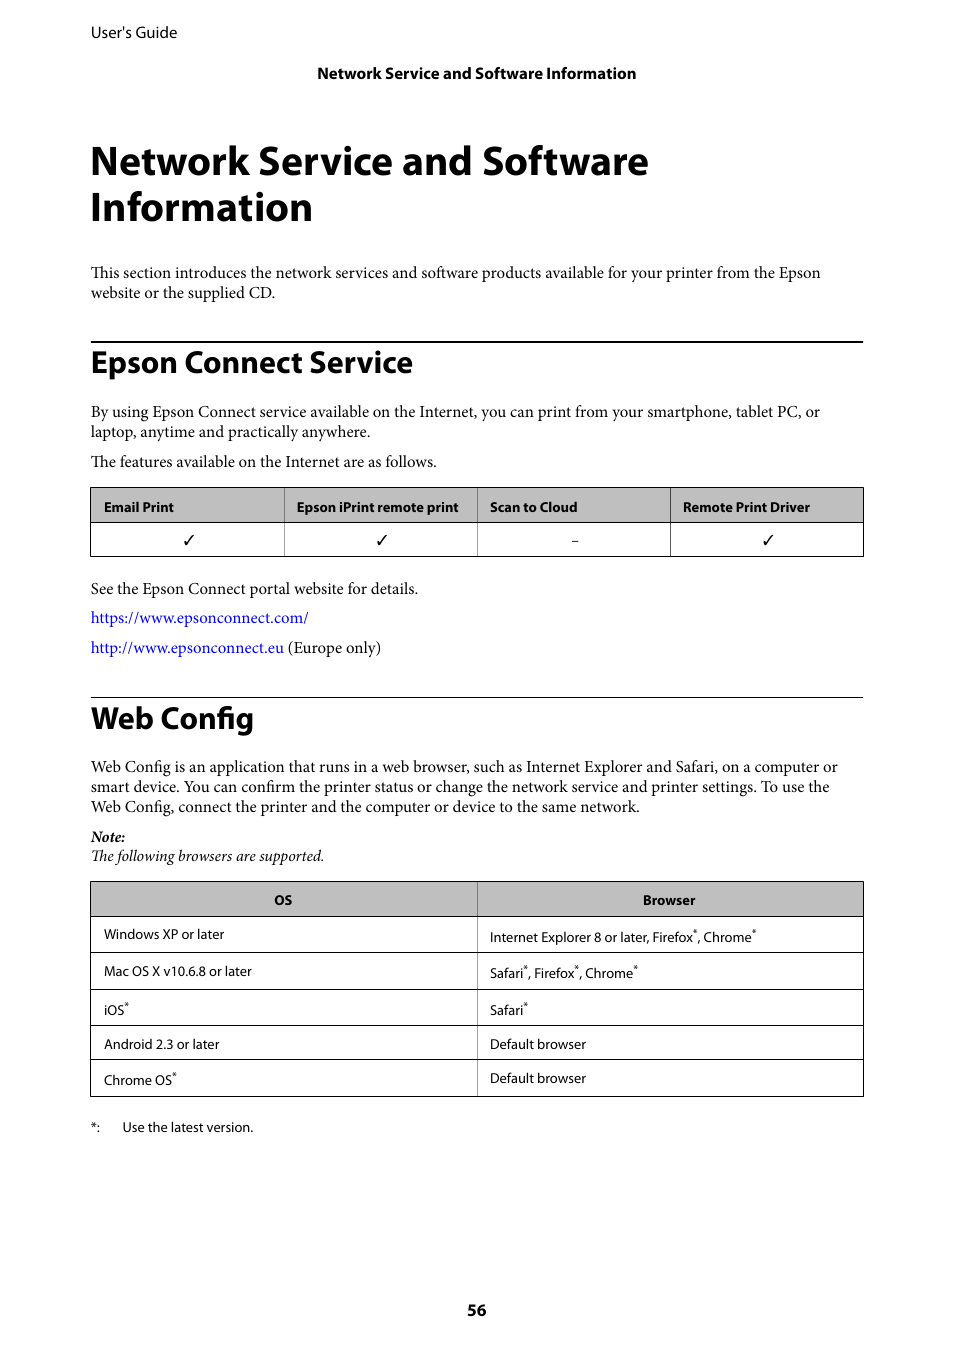 Network service and software information, Epson connect service, Web config  | Epson L805 User Manual | Page 56 / 93 | Original mode